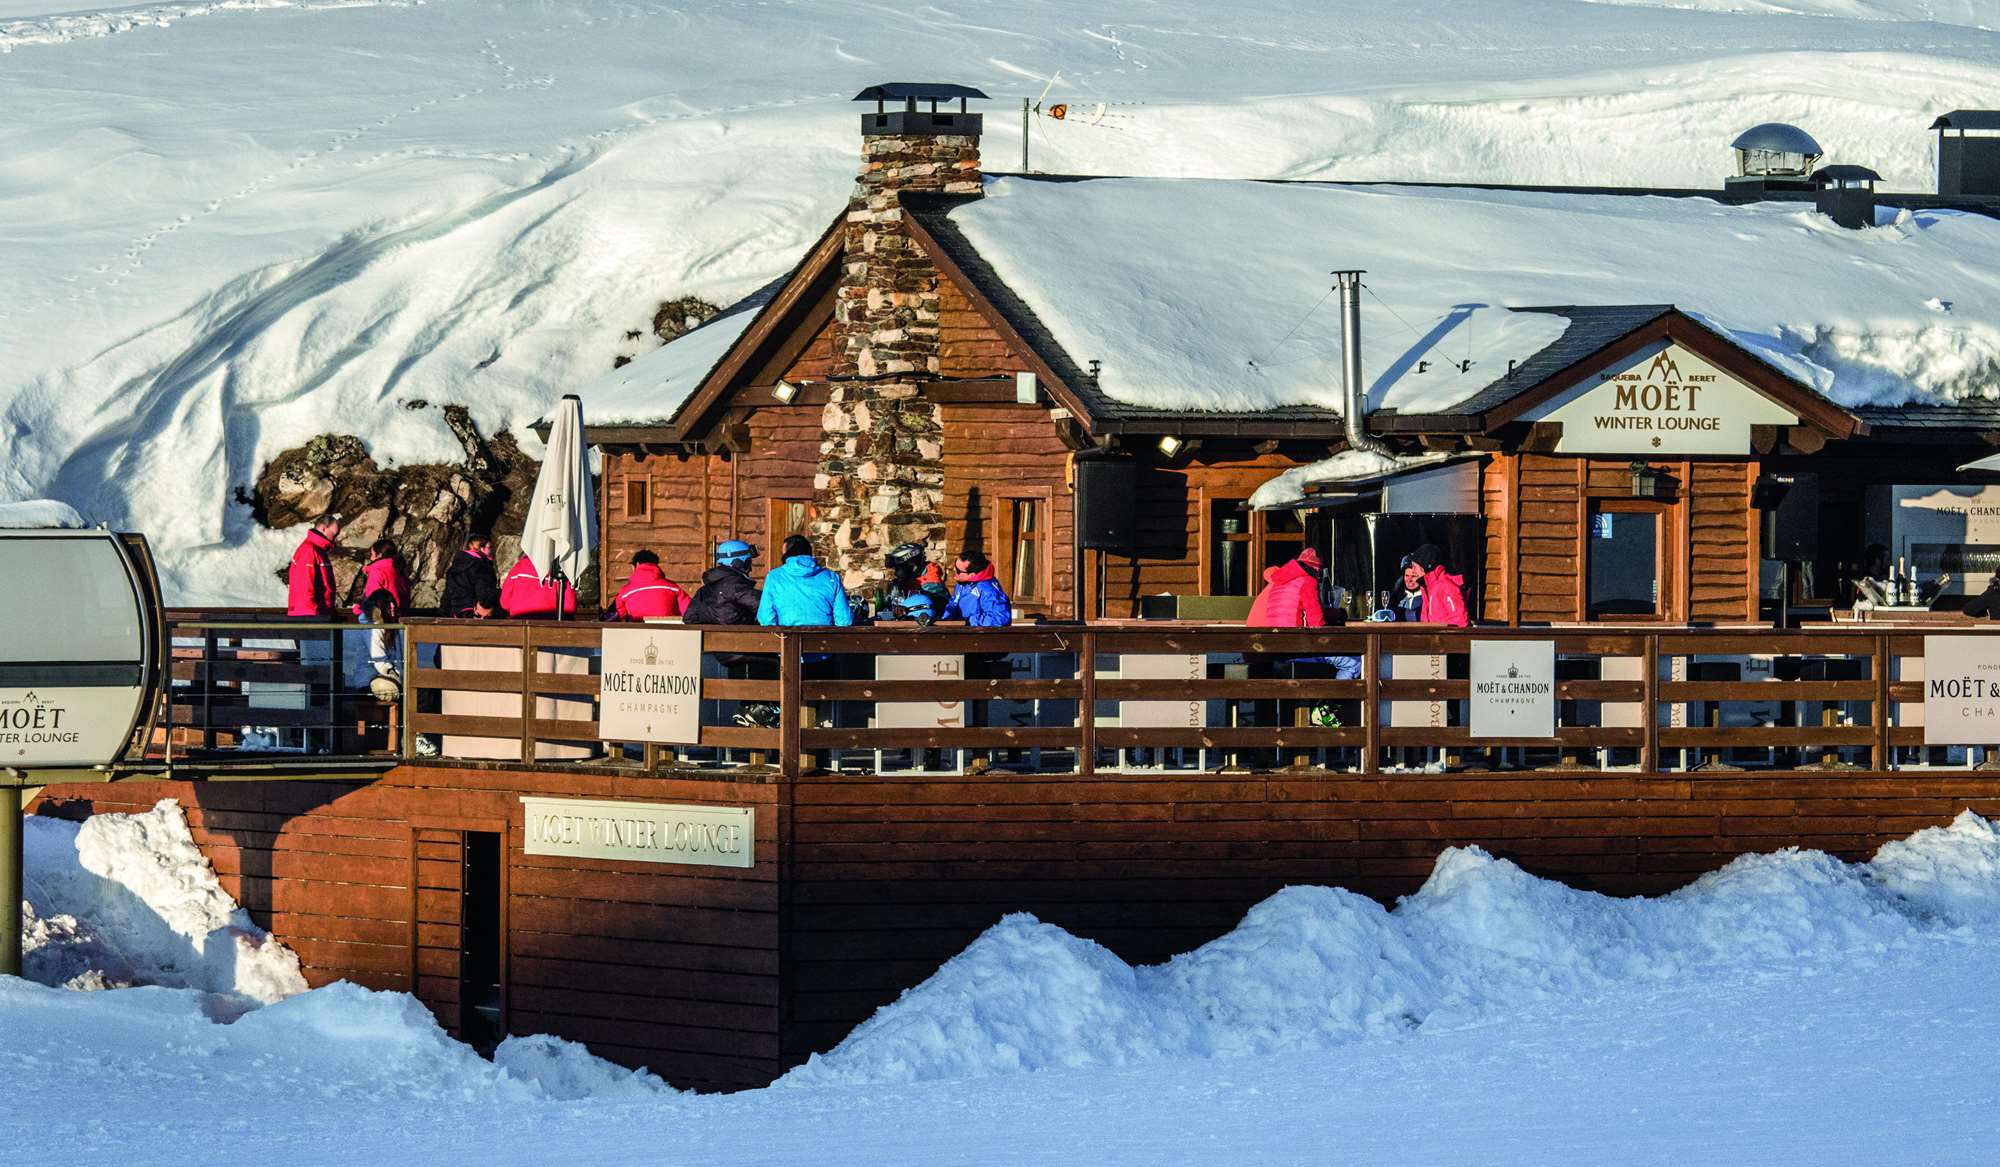 The Moet champagne bar in Baqueira